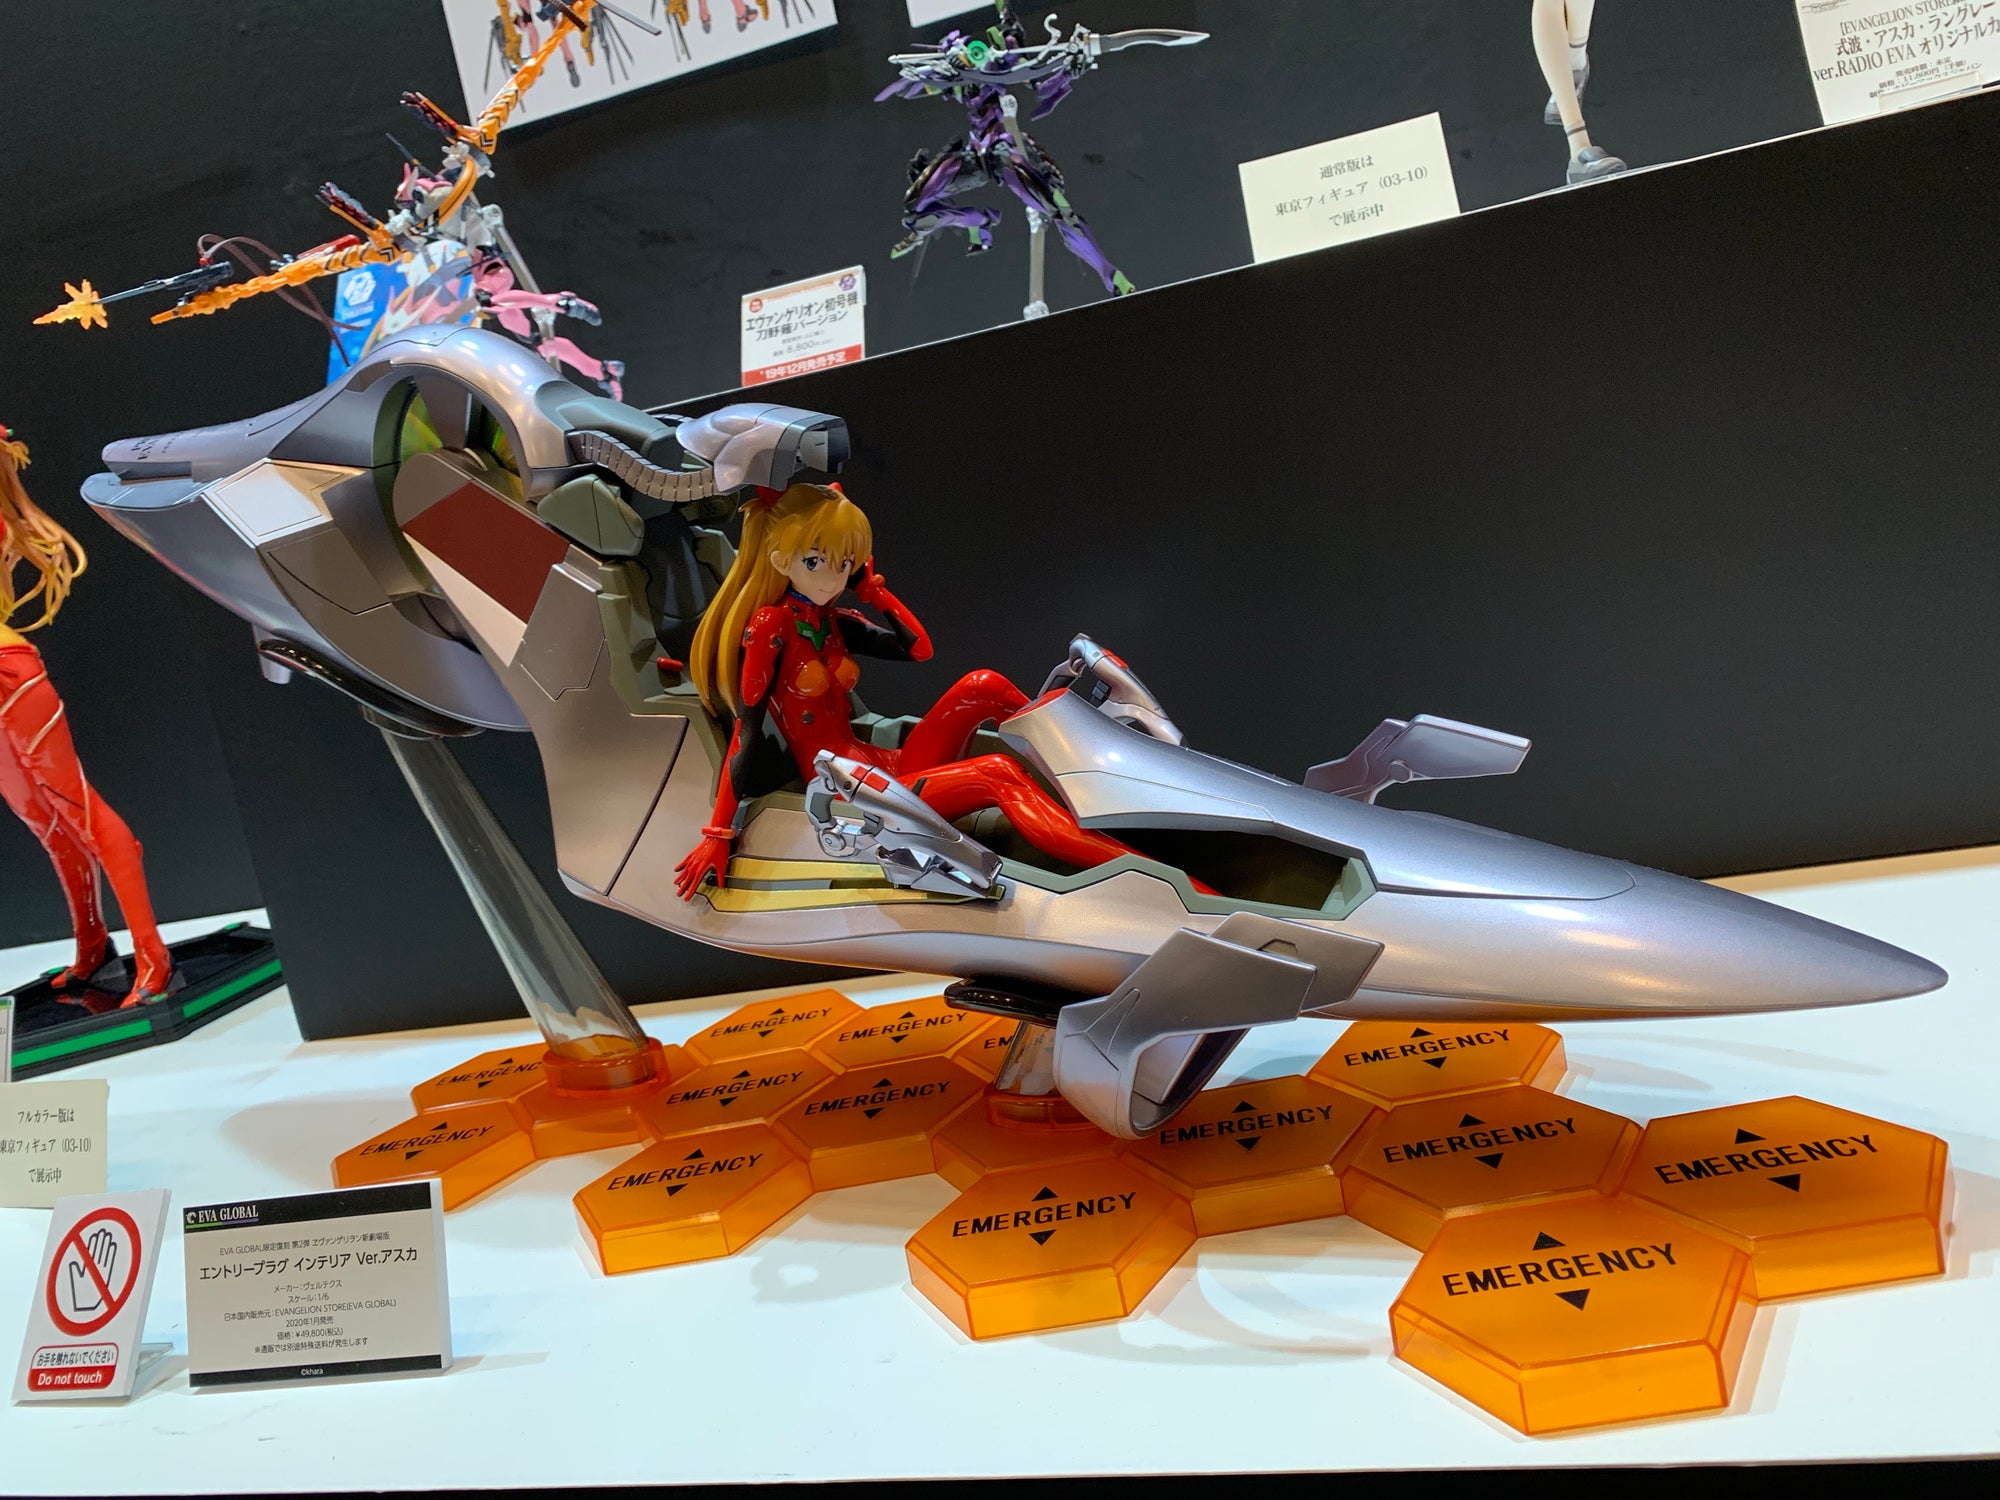 A Quick Look at the Wonderful Models of Wonder Fest